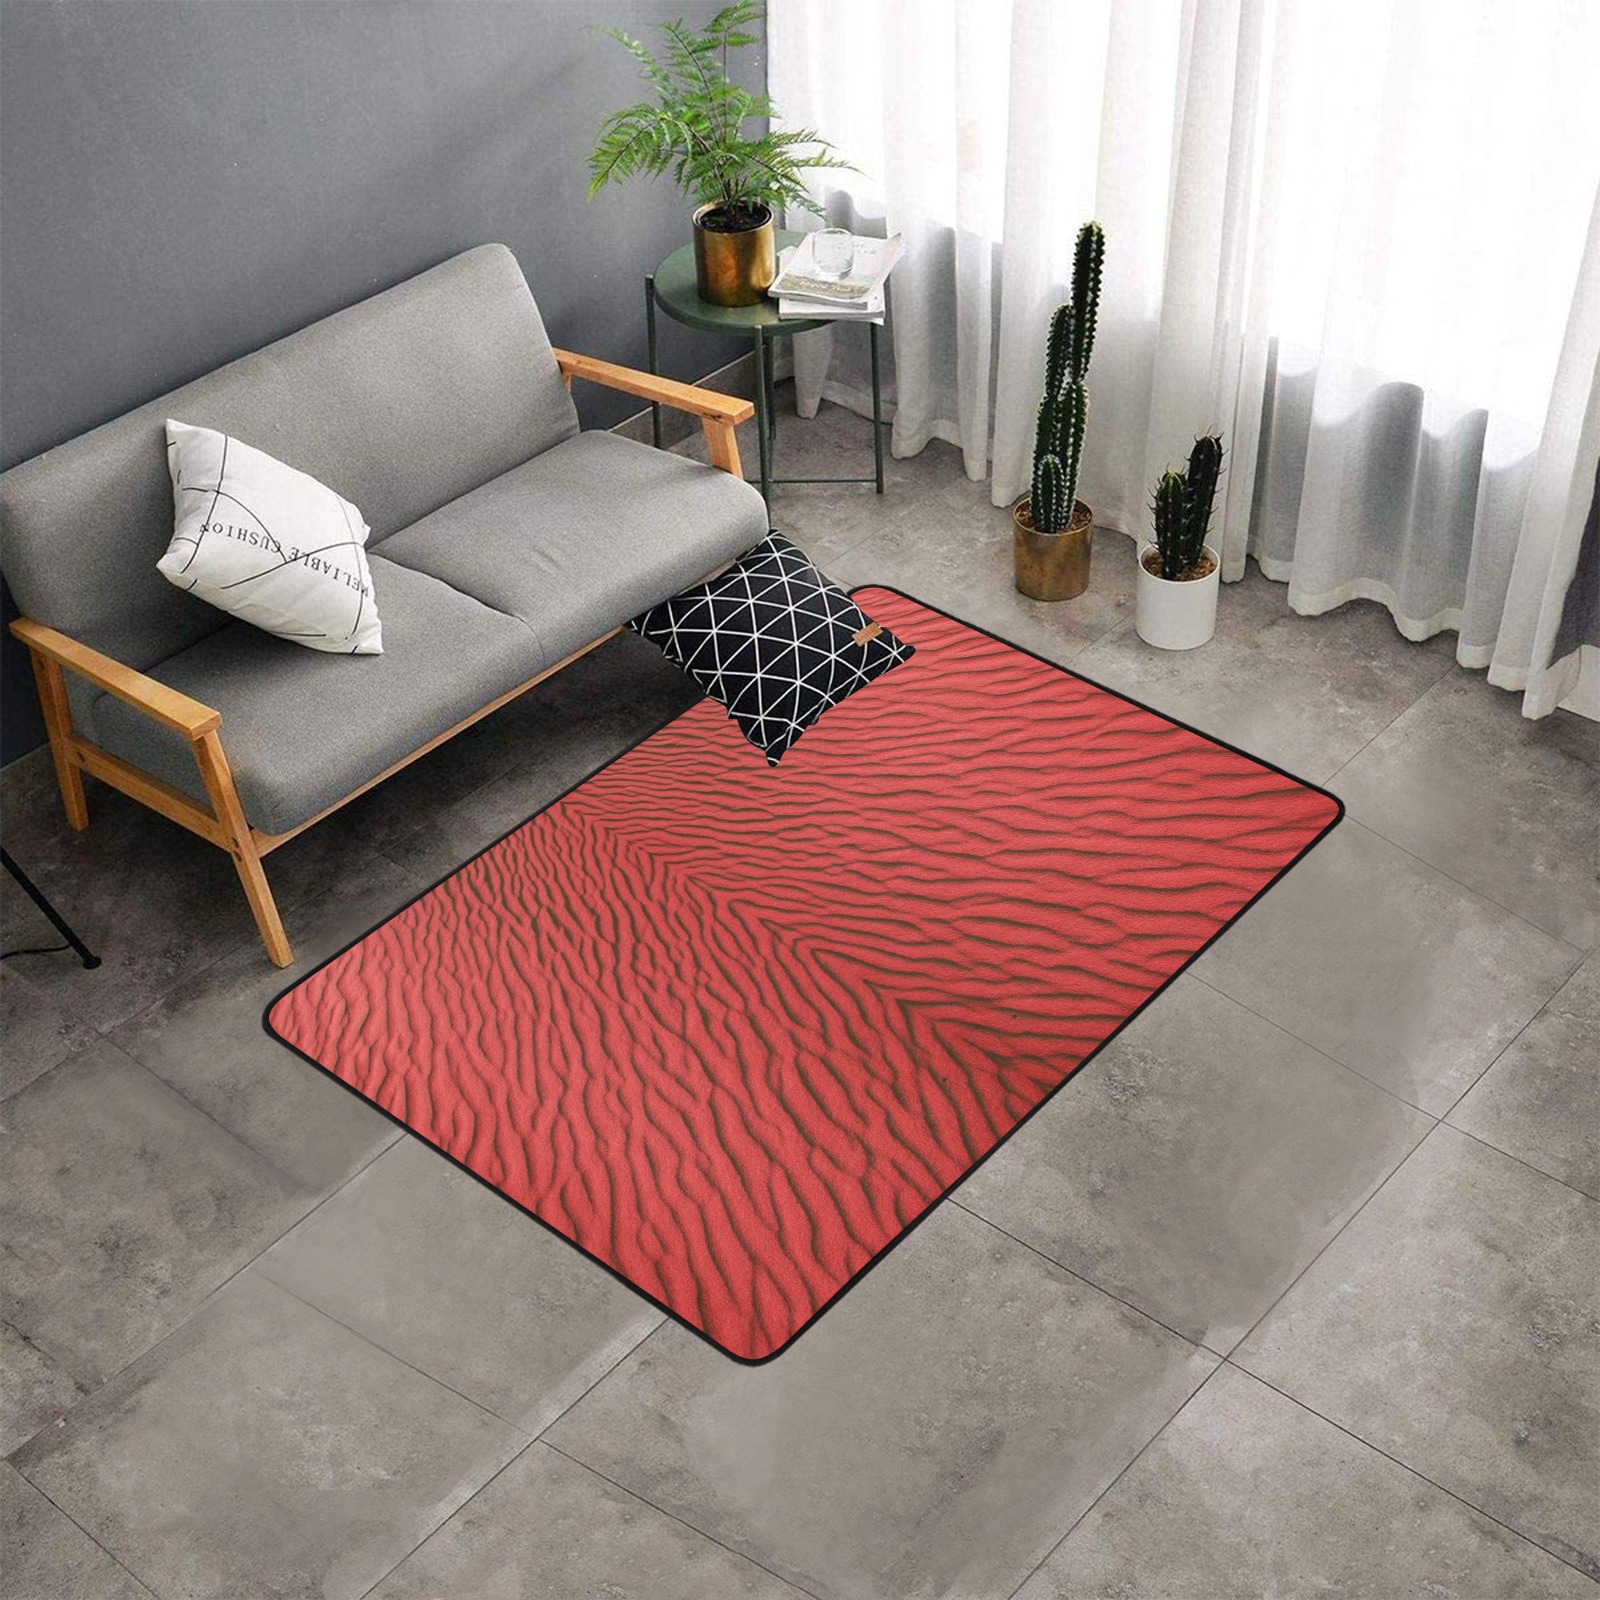 sand -red Area Rug with Black Binding 5'3''x4'